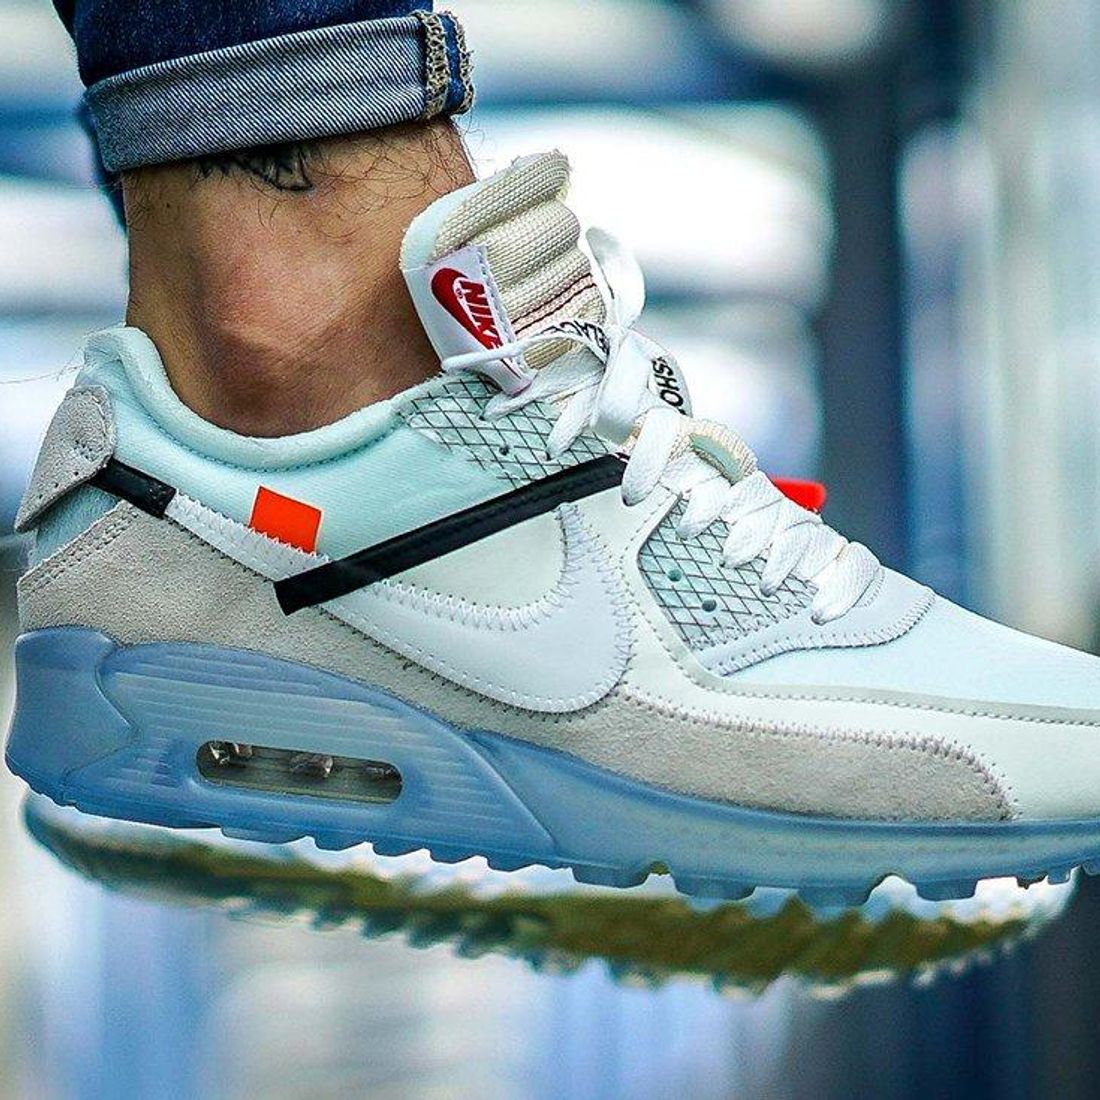 An On-Foot Look At The Off-White X Nike Air Max 90 - Sneaker Freaker